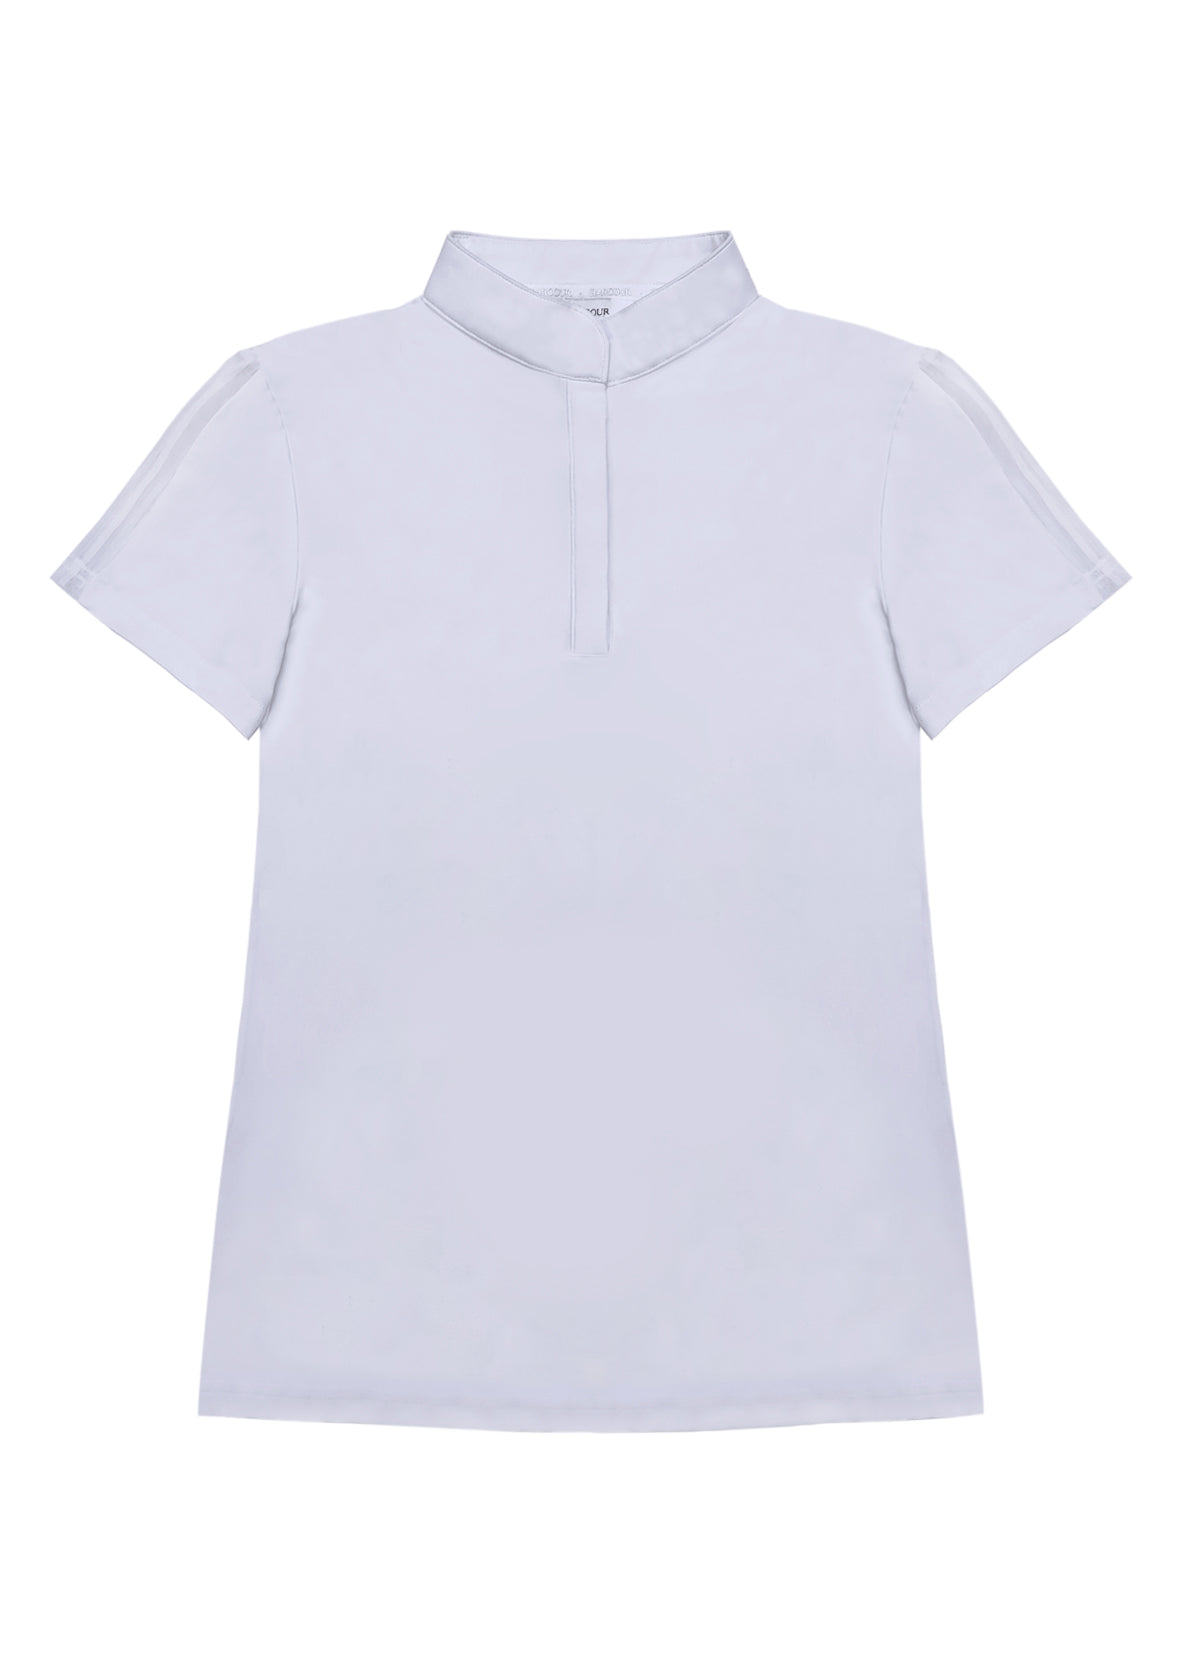 Prystie short sleeve competition polo